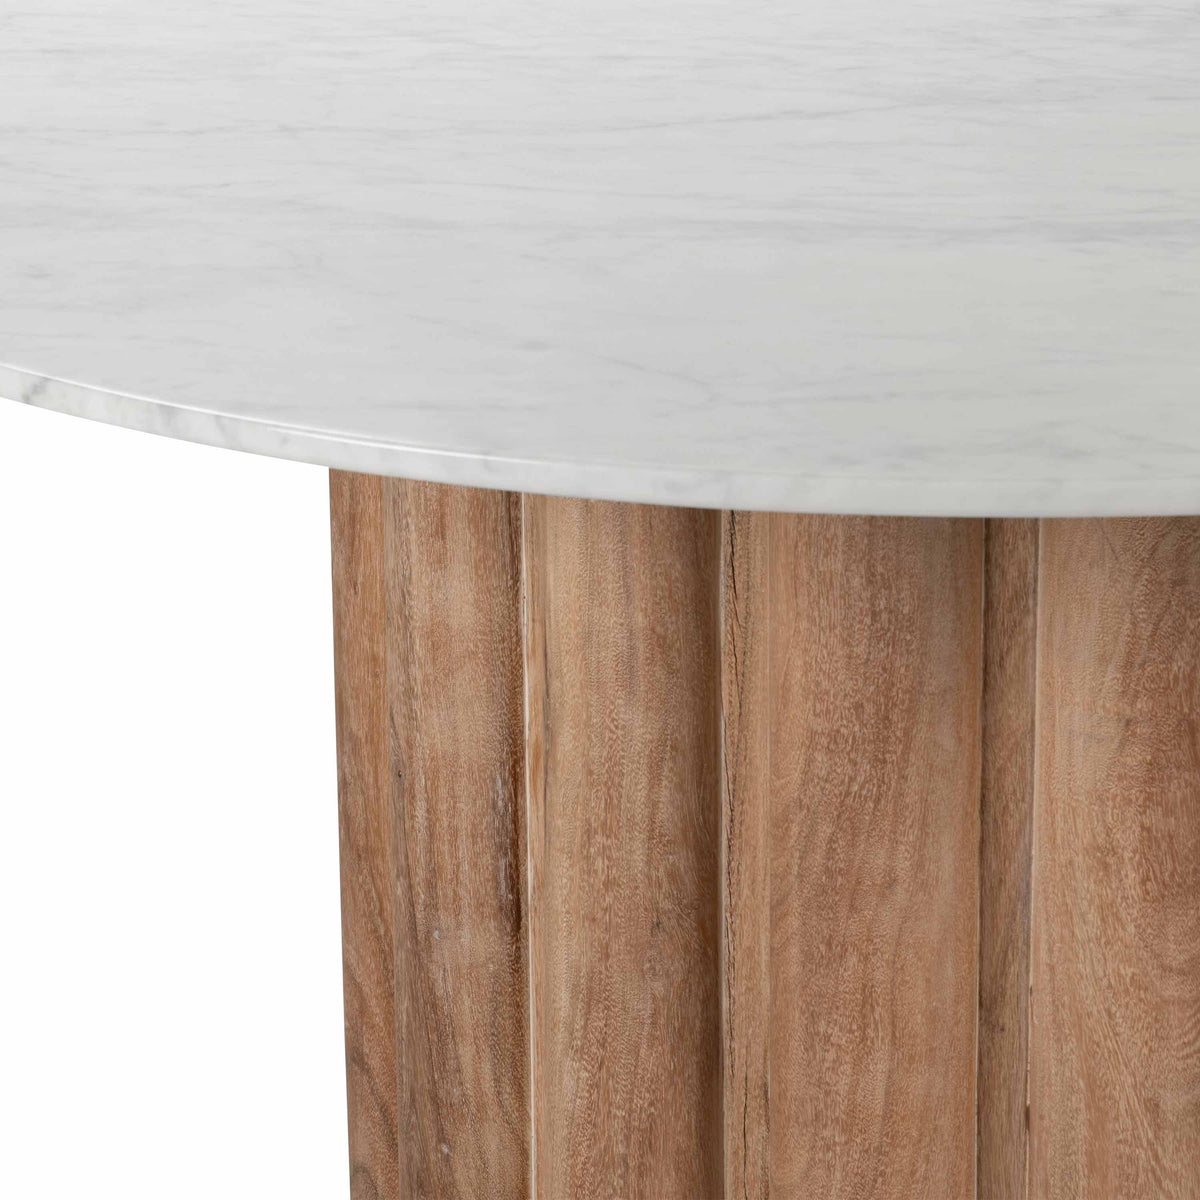 Eden Rock Dining Table in White Marble Top